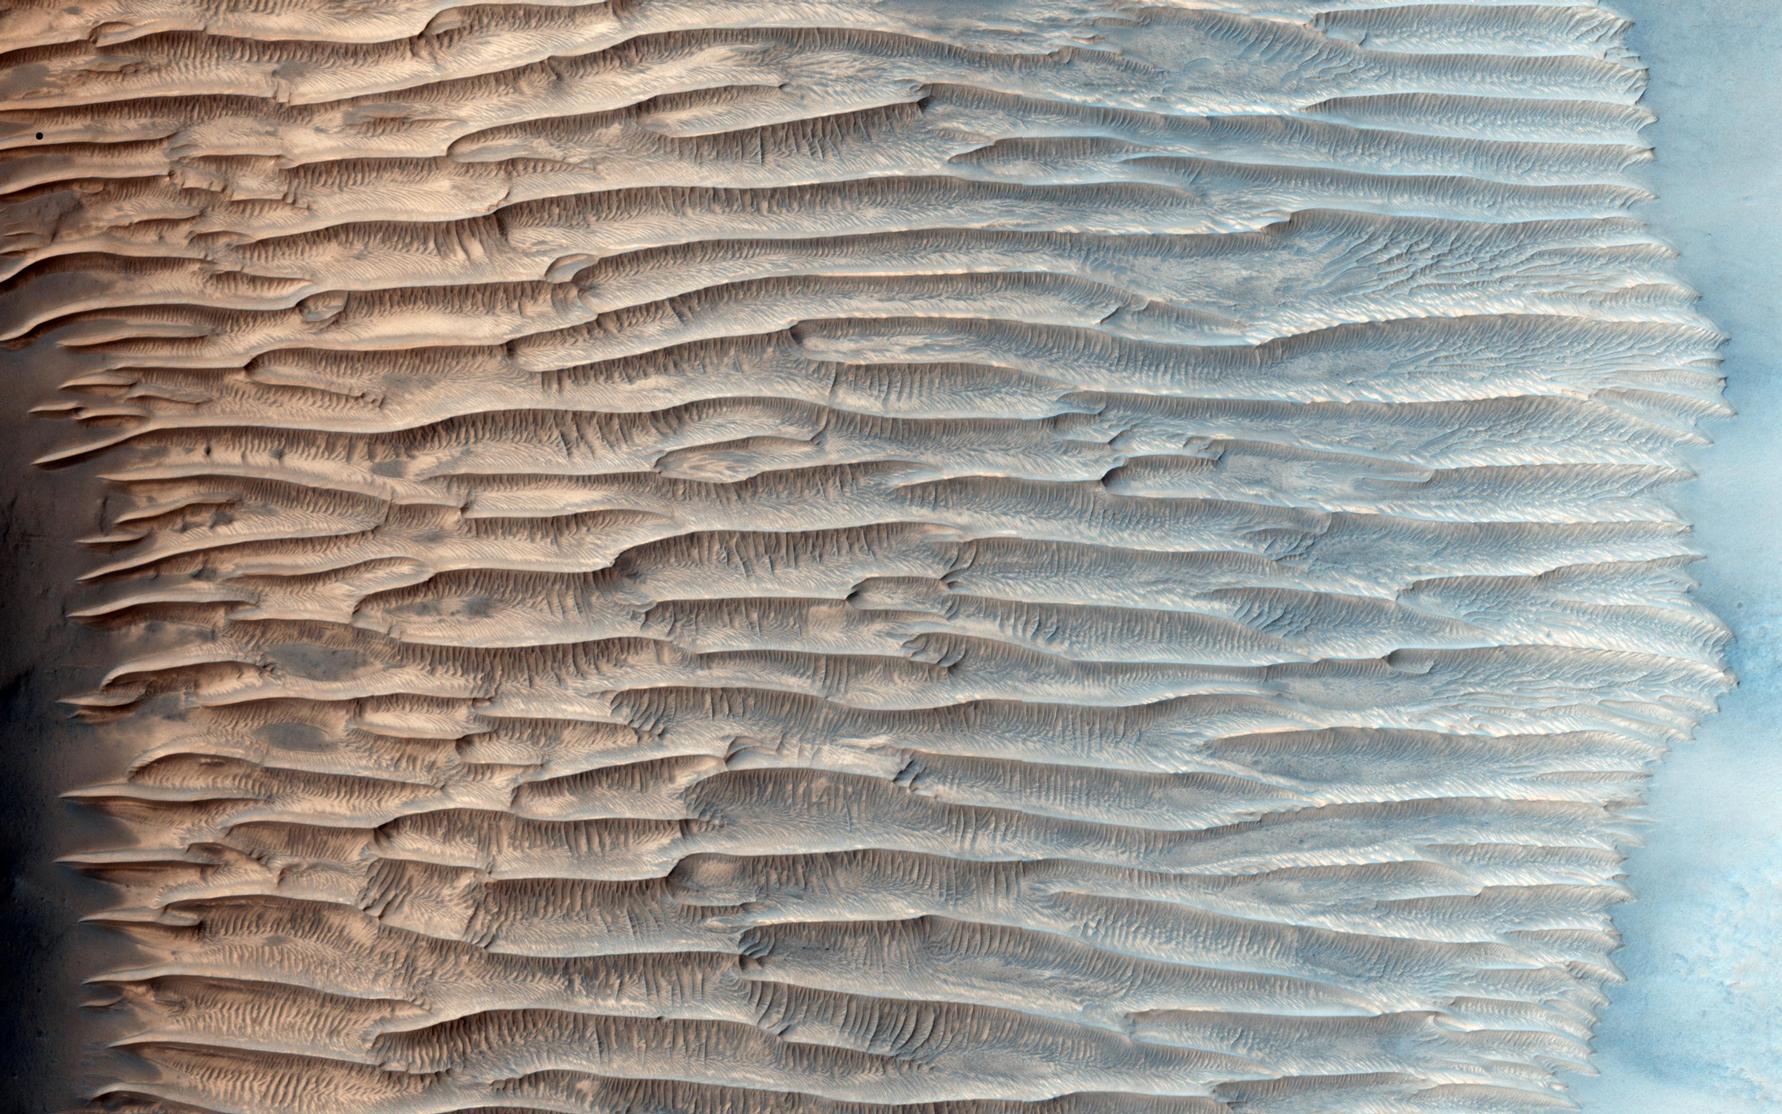 This HiRISE image shows a valley filled with an assortment of linear ridges. These ridges are often referred to as transverse aeolian ridges, or TAR, and they take a variety of forms.